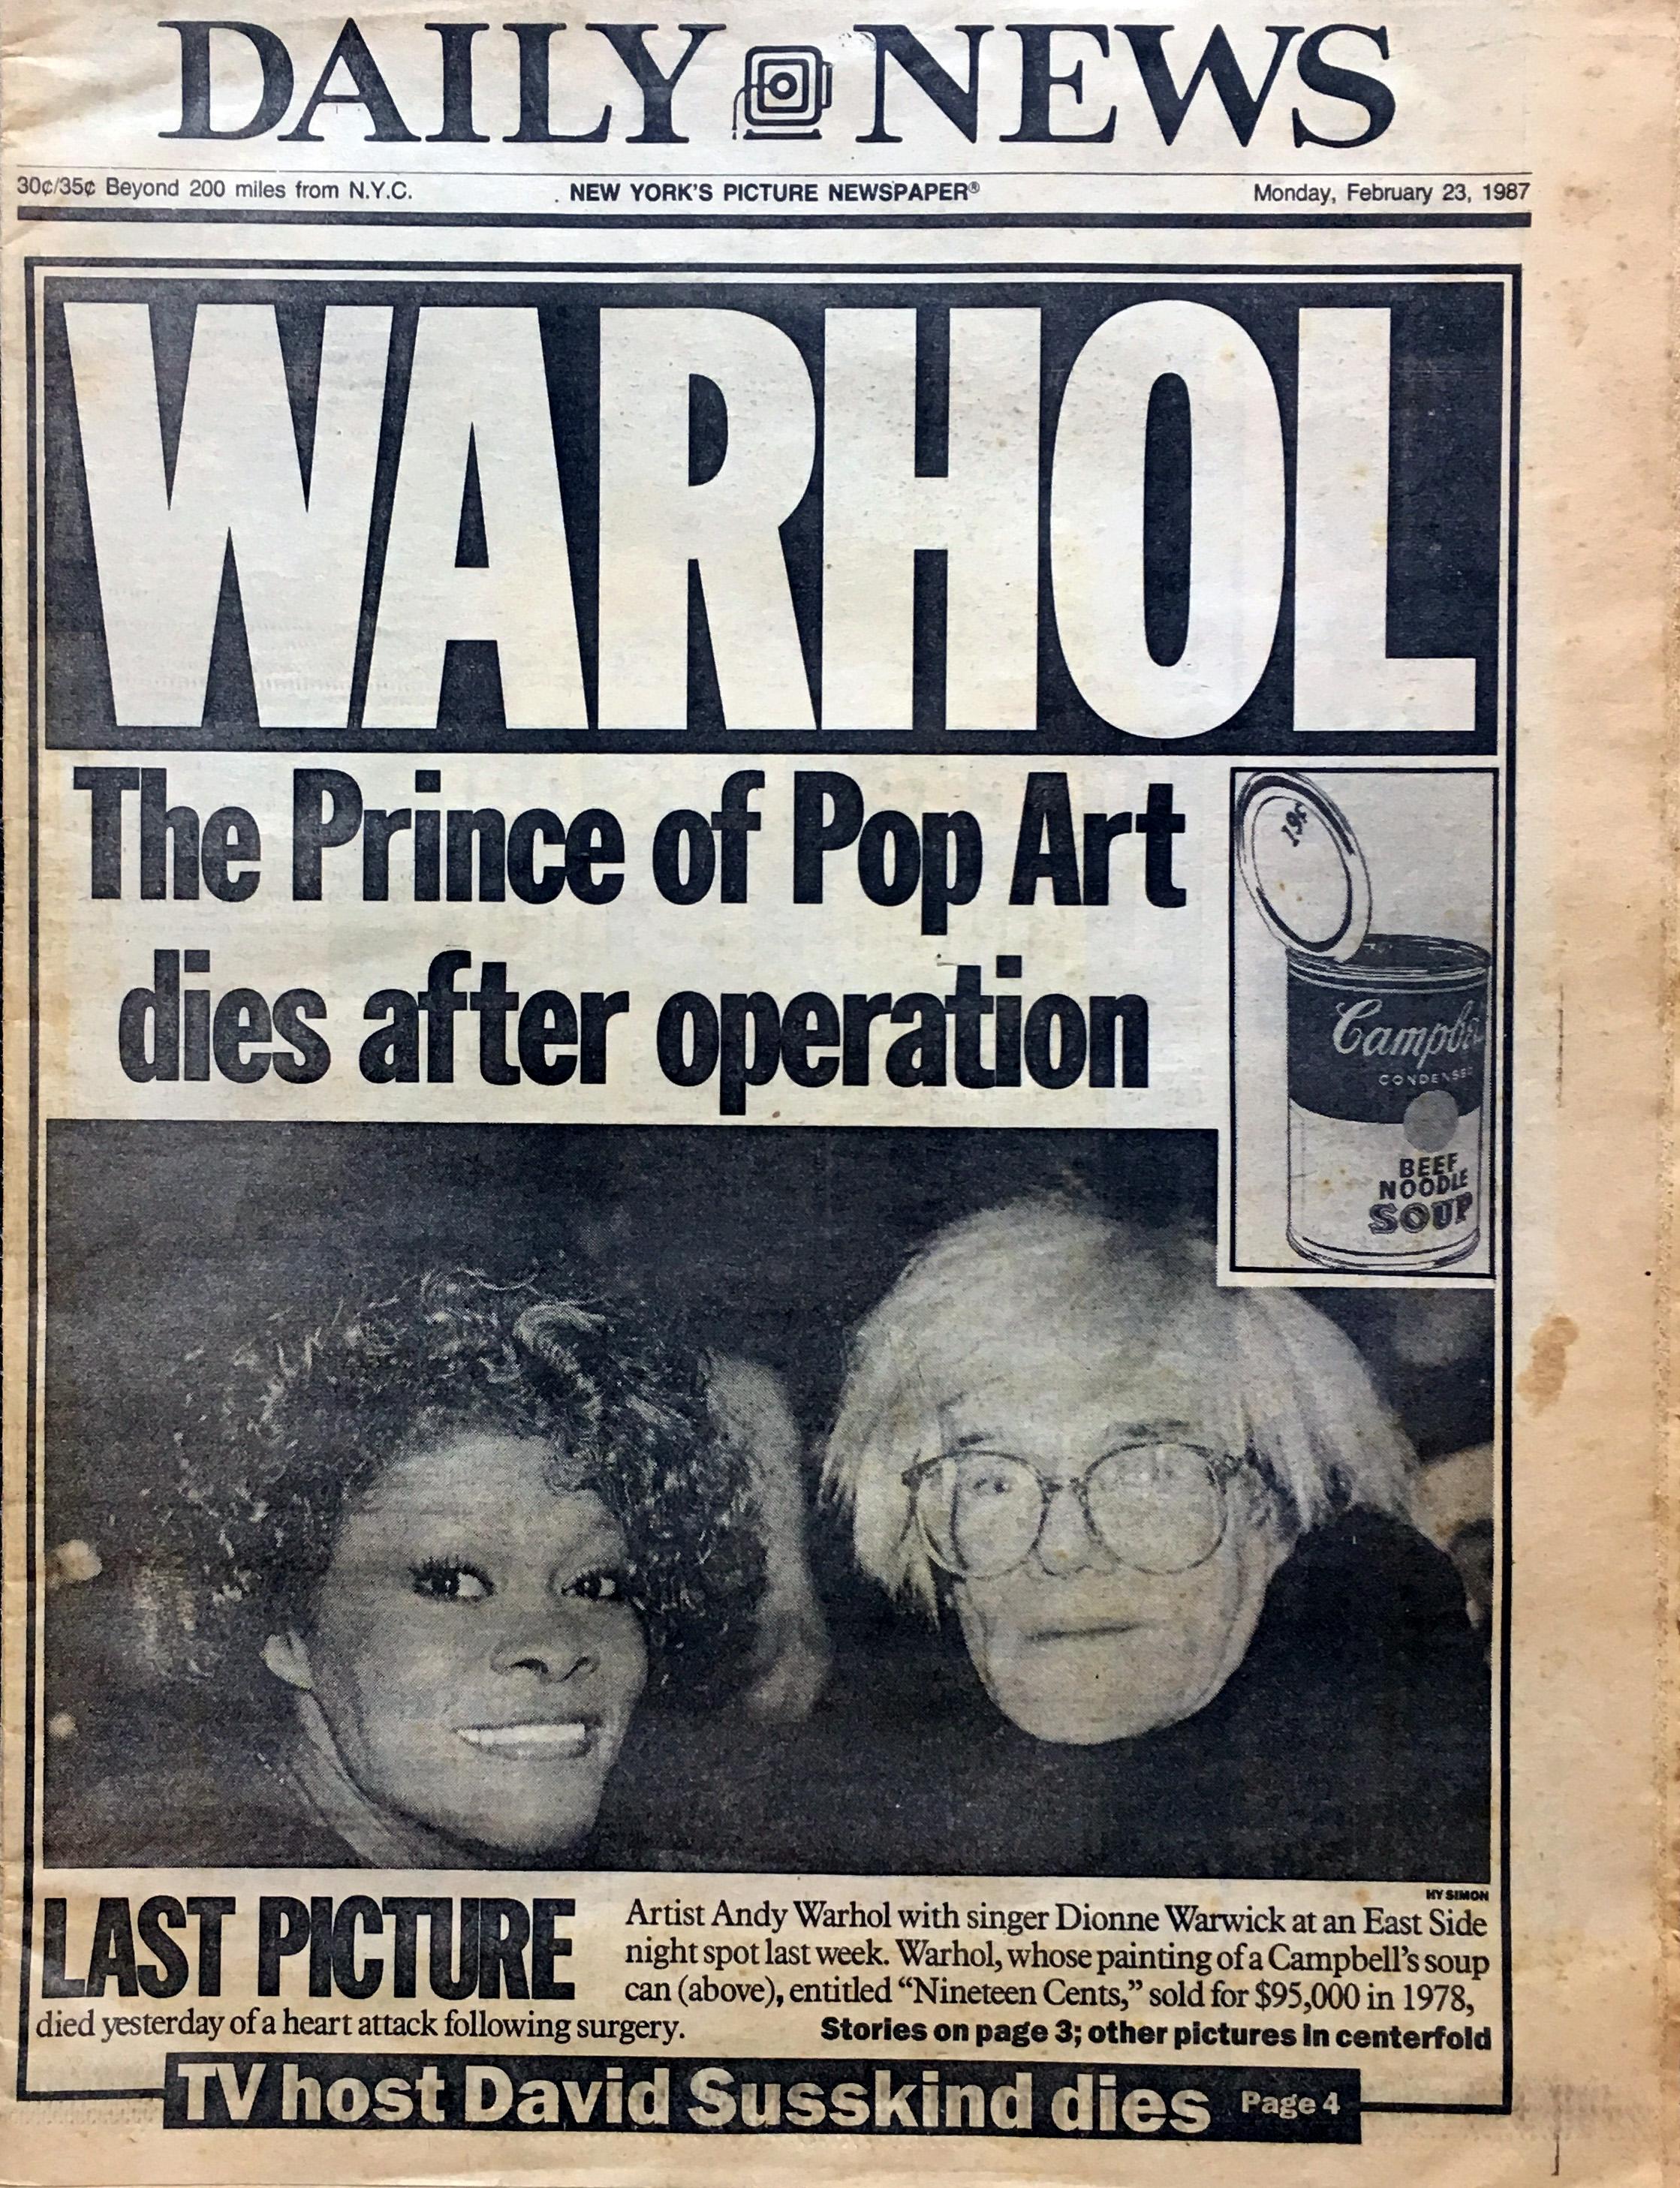 Original New York Daily News Front Cover, Feb 23, 1987, "Pop Art's King Dies." A rare, highly sought after Warhol collectible echoing the Warhol Death series that would look unique framed. 

Caption Reads "Andy Warhol, 1928 - 1987 POP ART'S KING